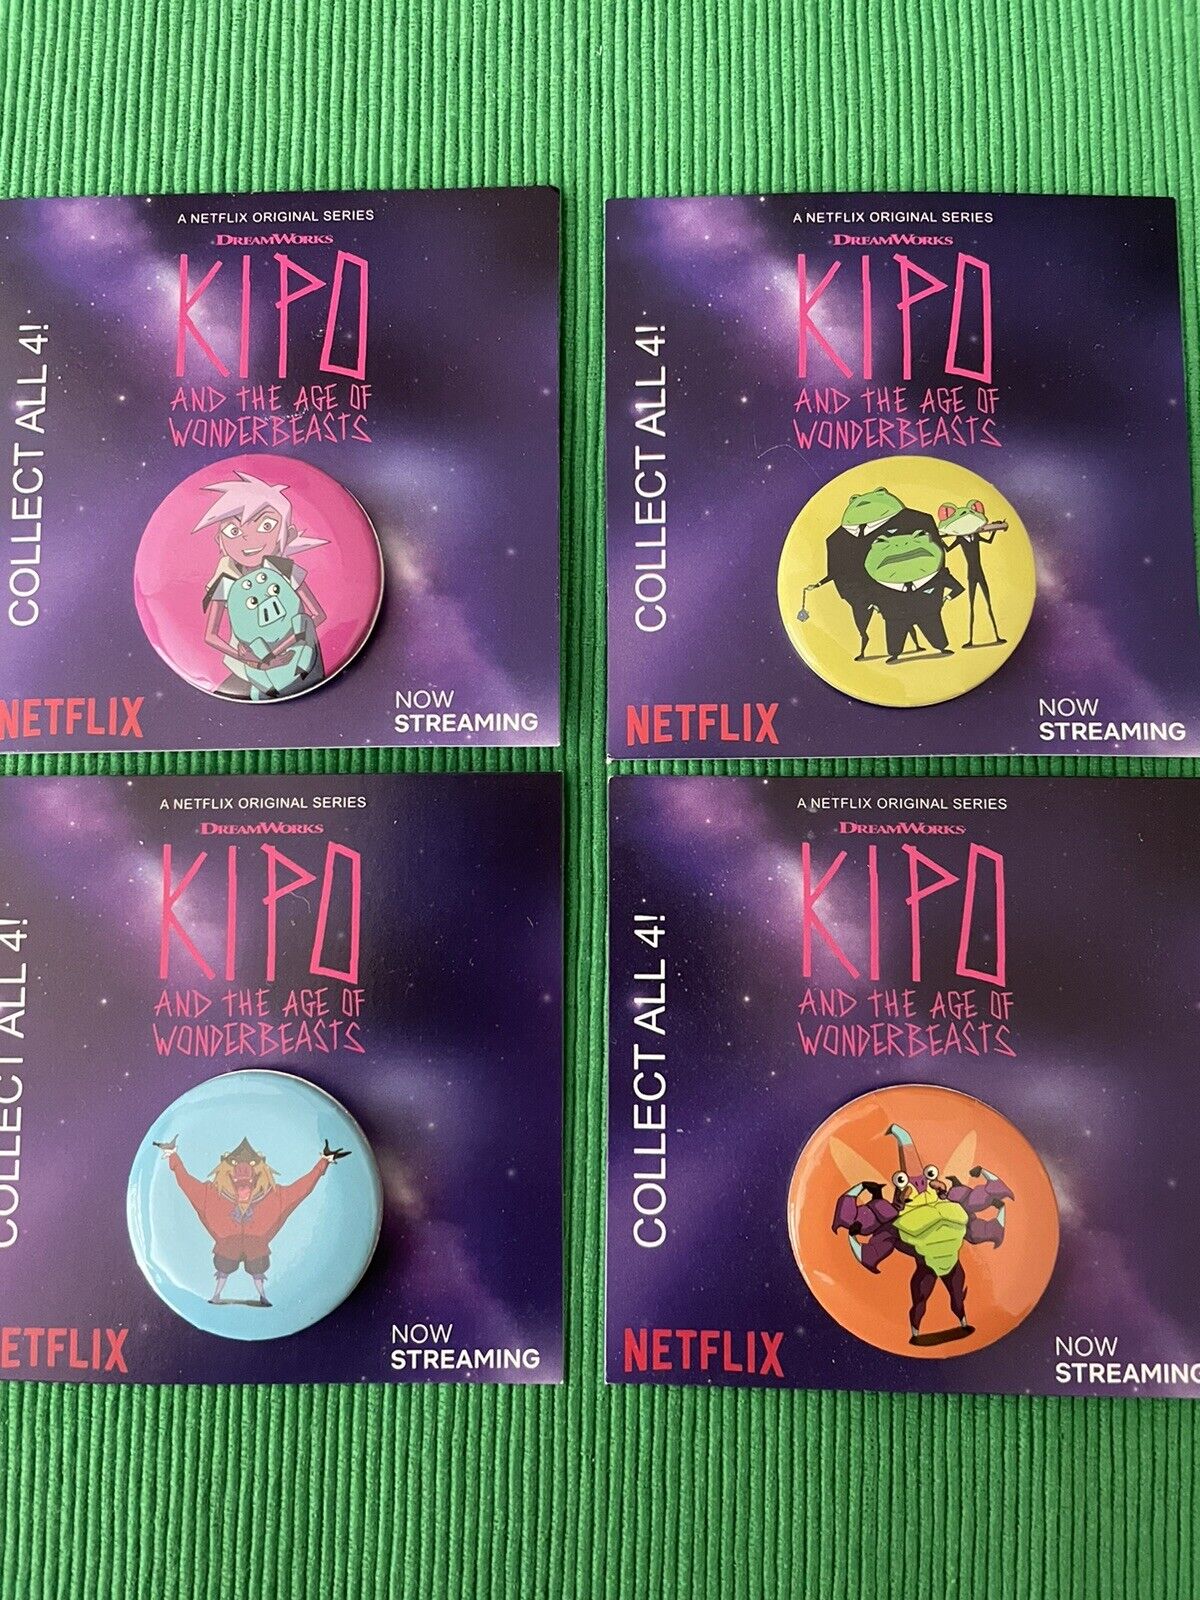 Kipo And The Age Of Wonderbeasts Promo Promotional Button Pin Set Netflix 